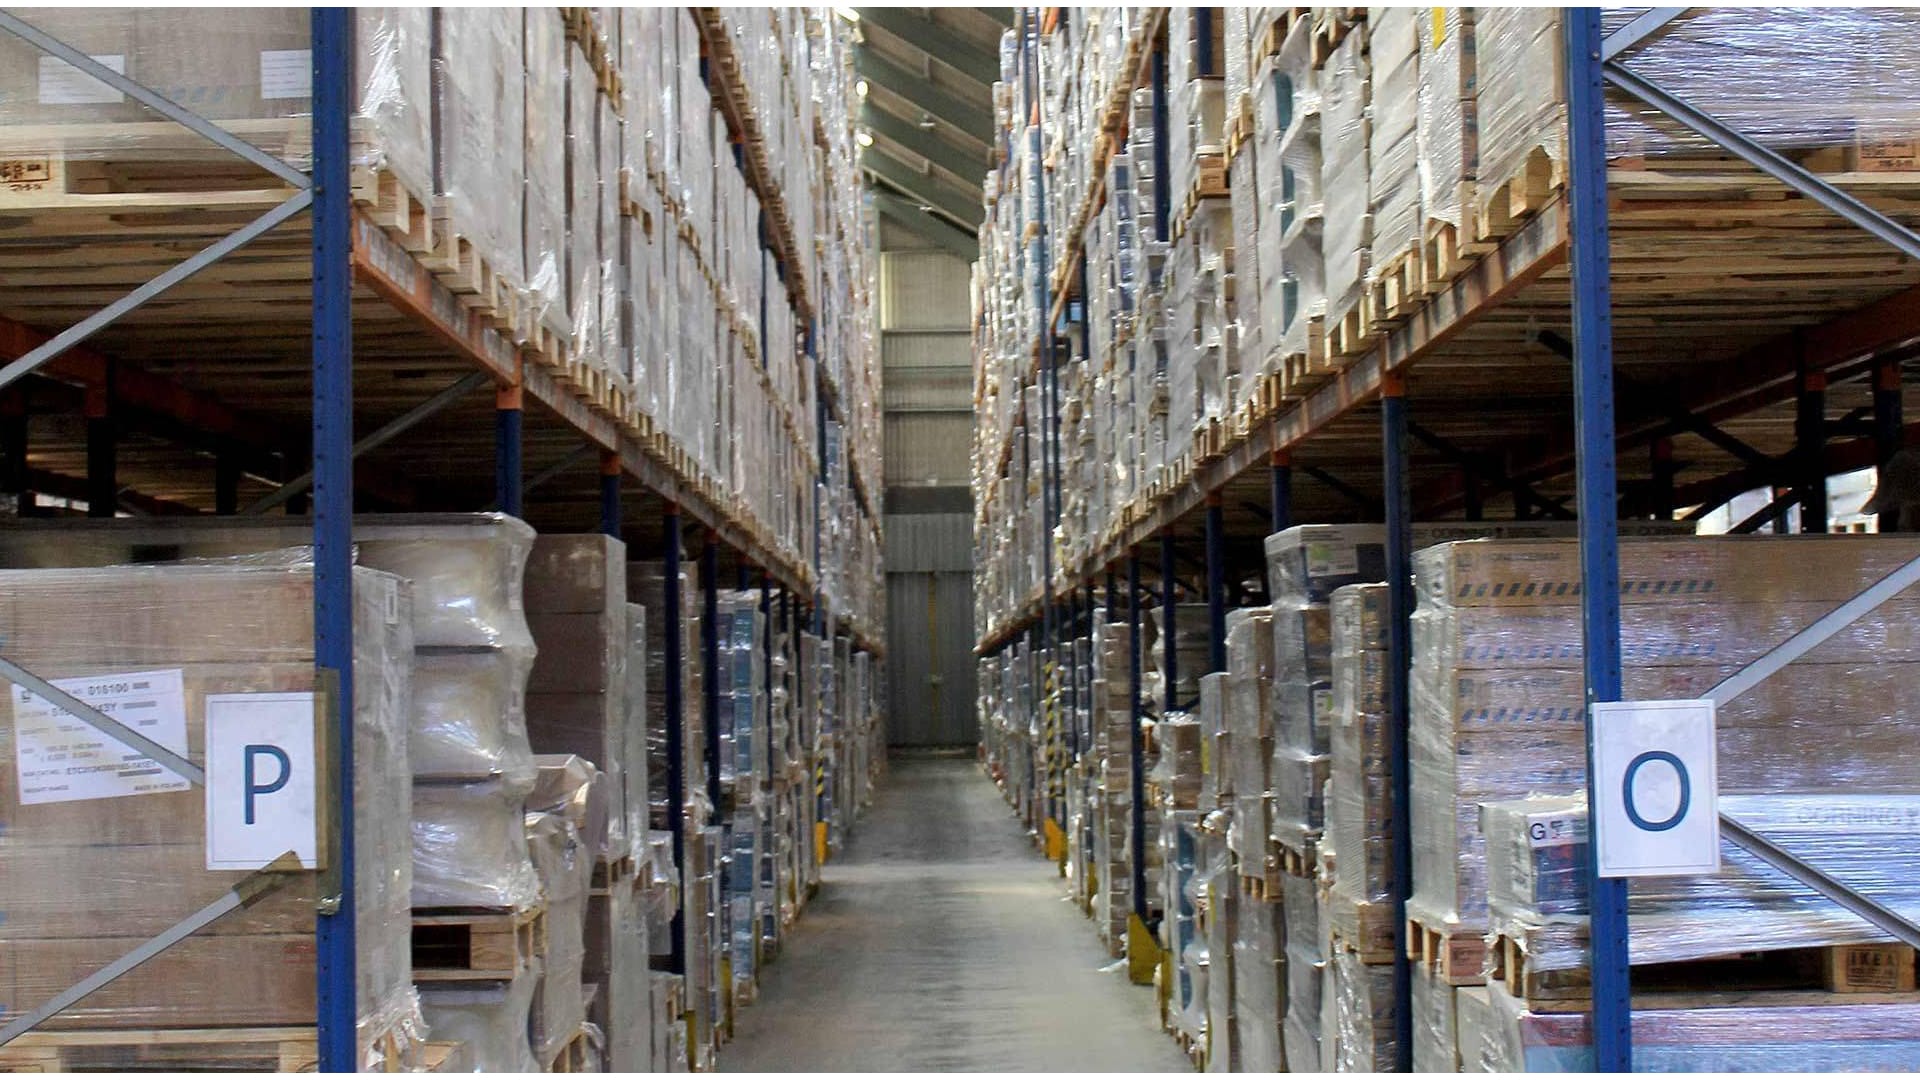 Image of warehouse with wrapped up boxes on pallets with multiple shelves